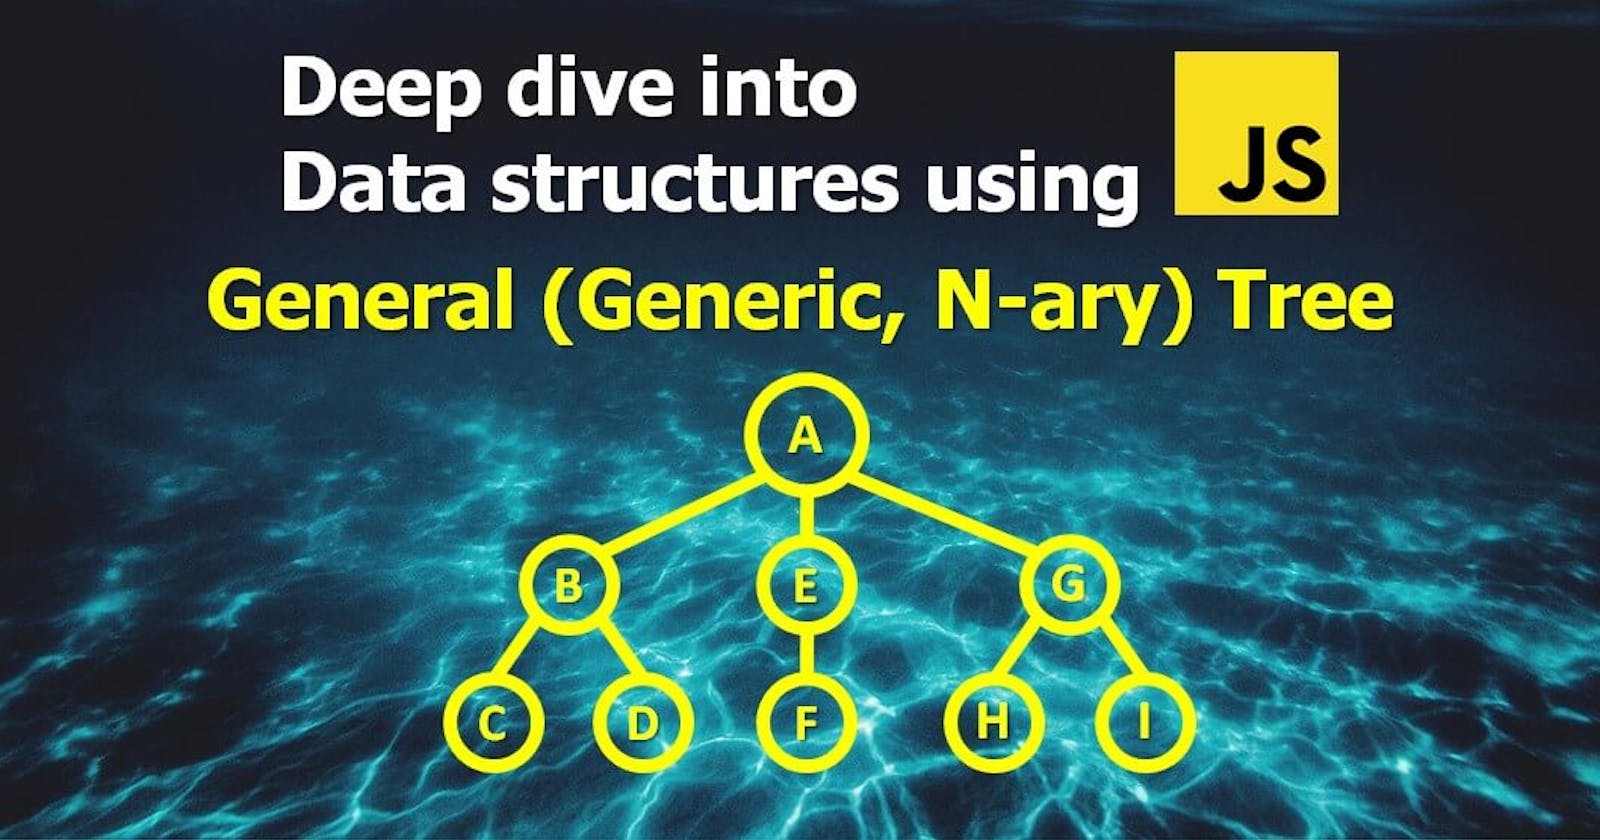 Deep Dive into Data structures using Javascript - General (Generic, N-ary) tree